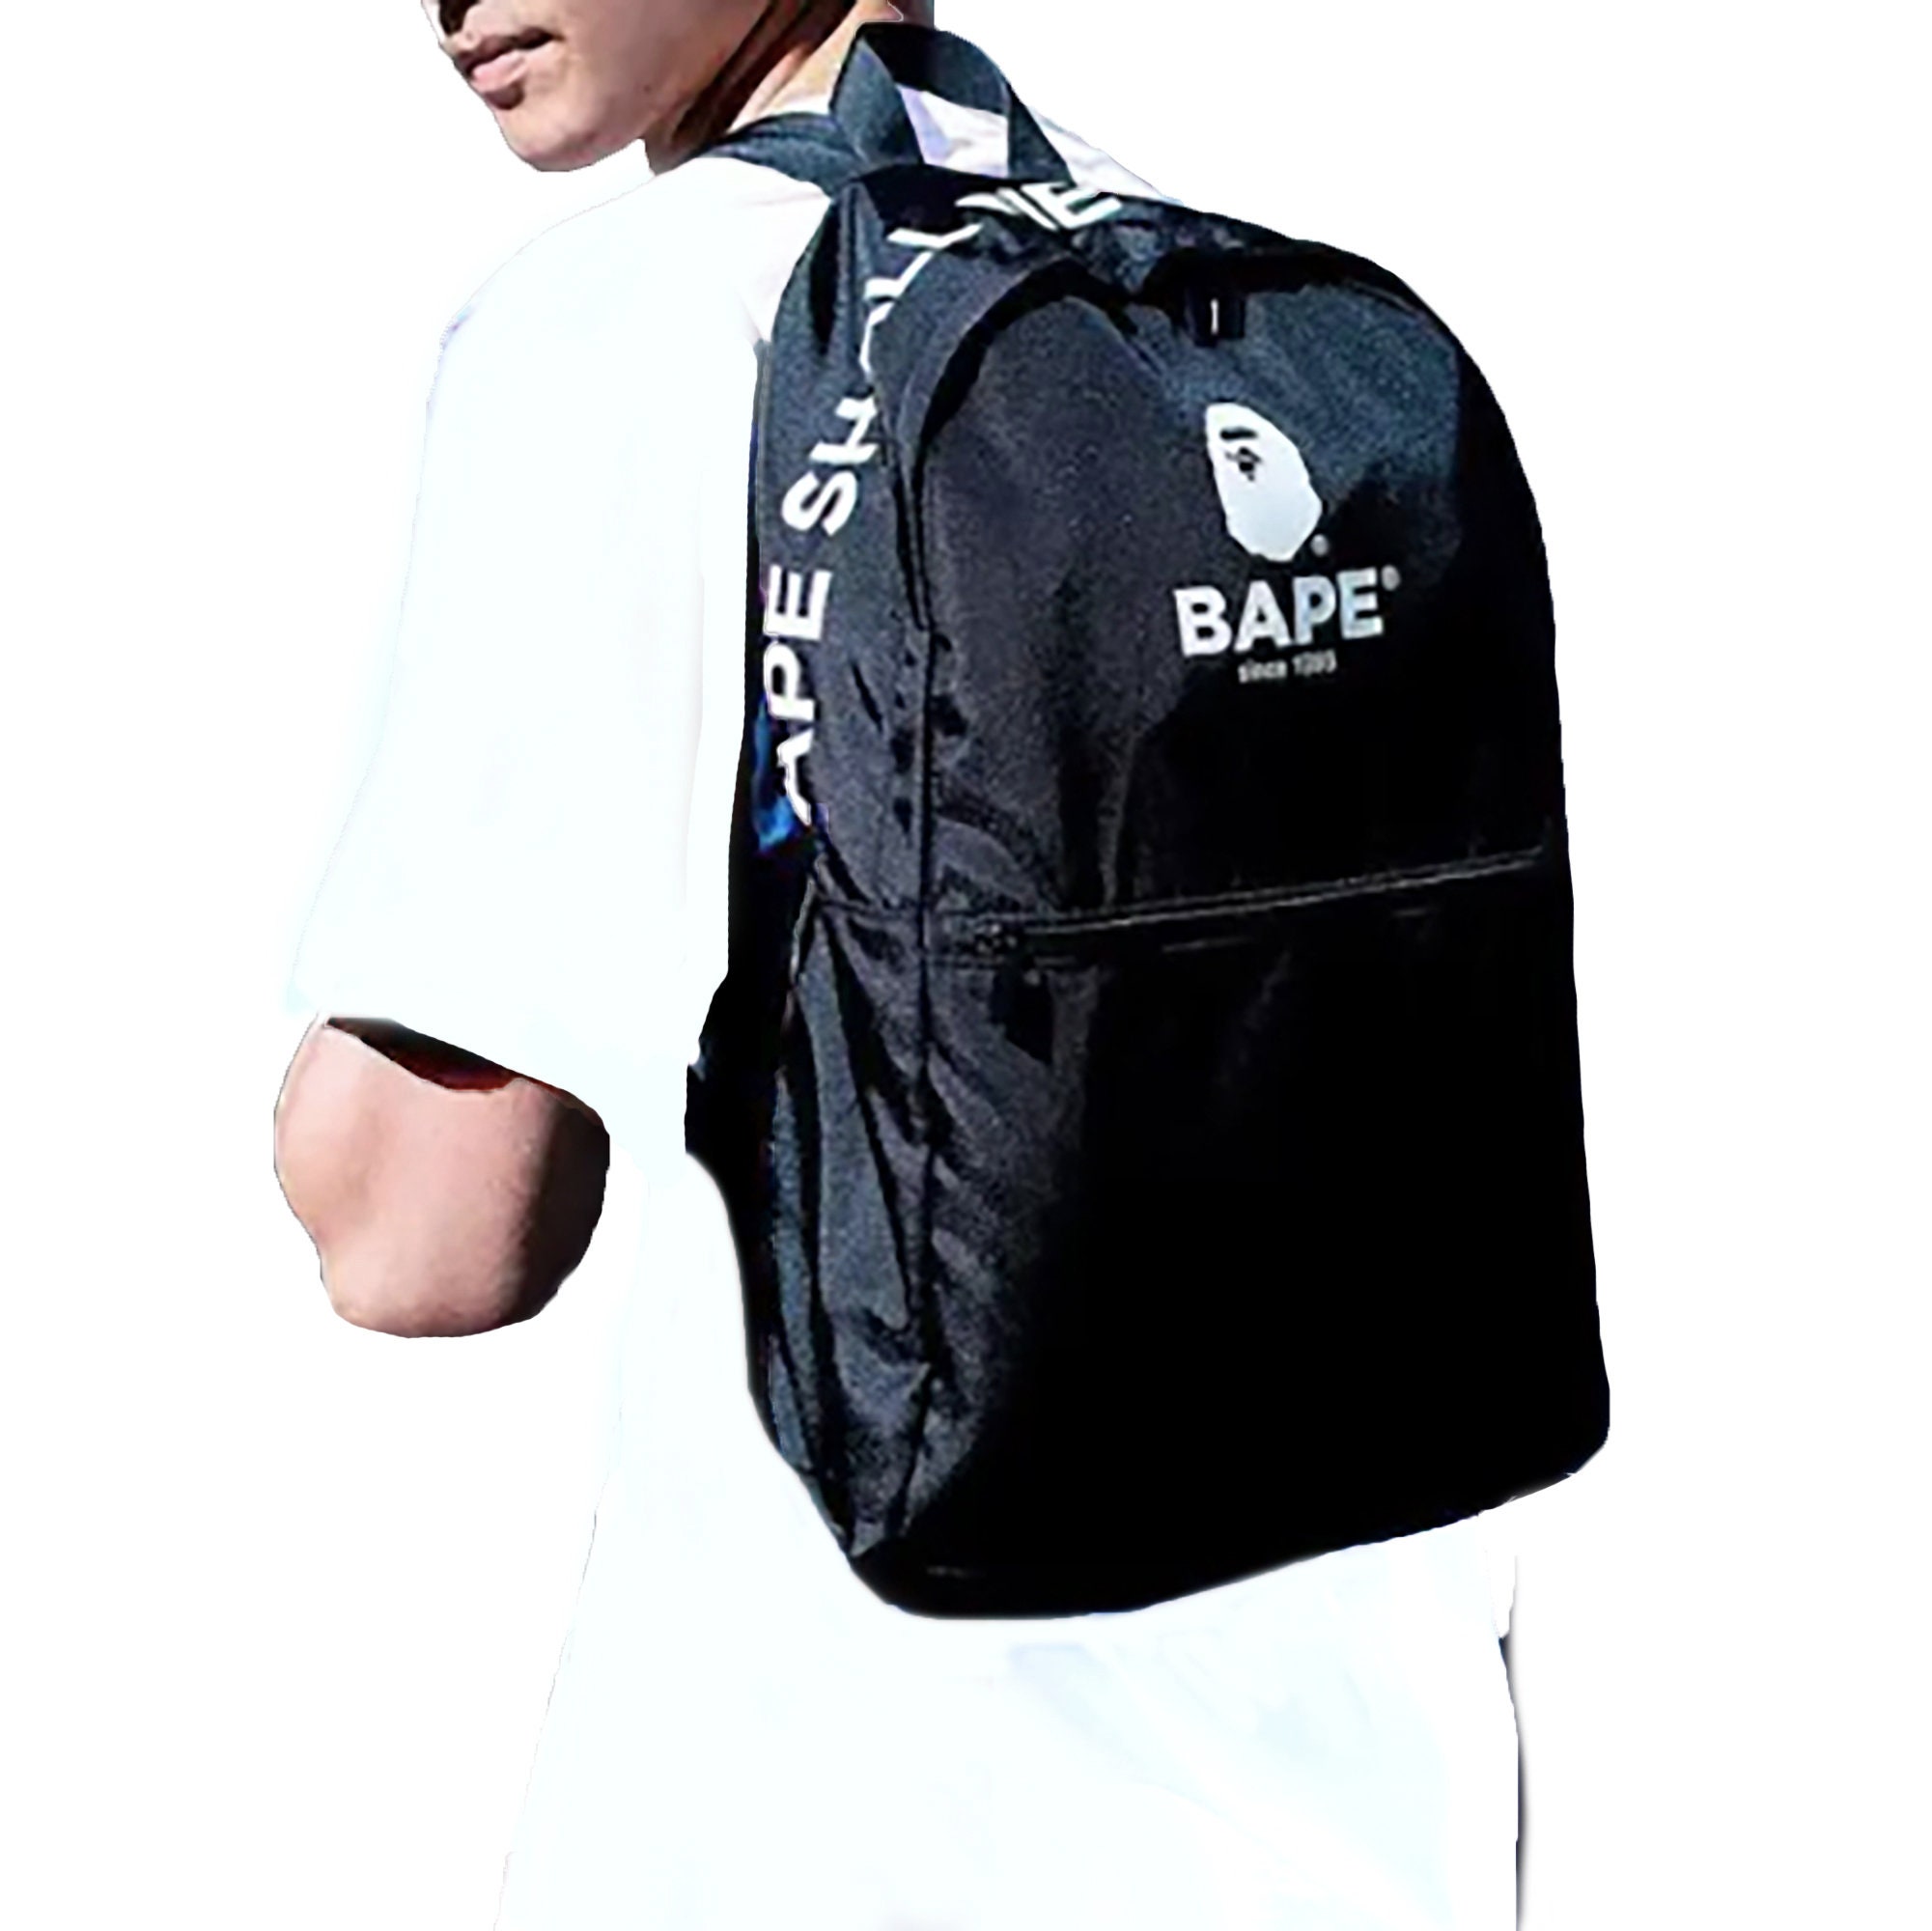 Bape Backpack in Black A Bathing Ape Backpack Gifts for Him Gifts Young  Adults Gifts for Teens Christmas Gifts Birthday Gift Streetwear Bags 